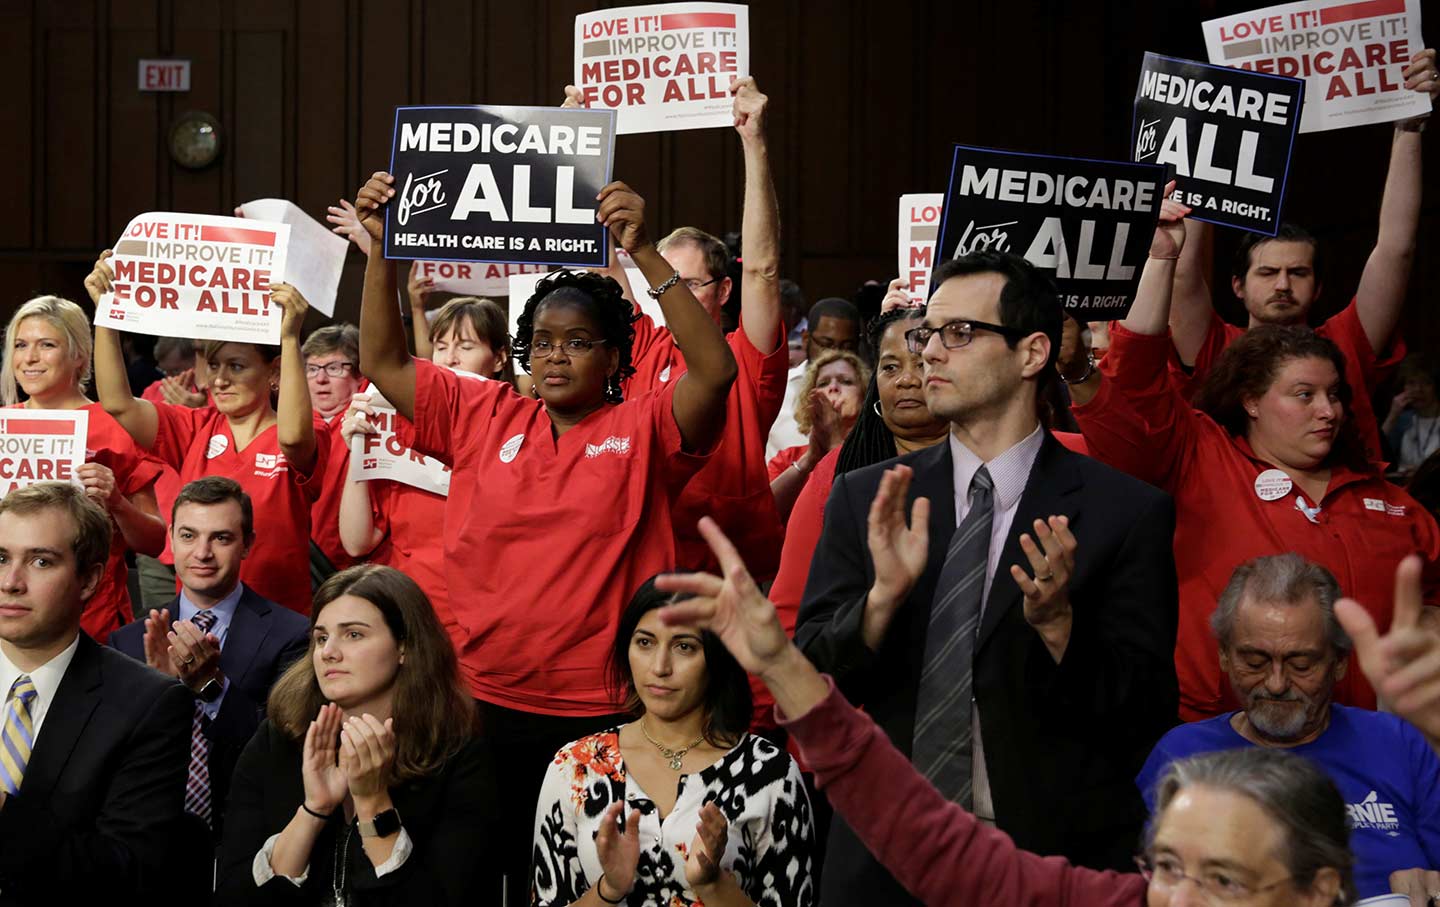 Medicare for All crowd